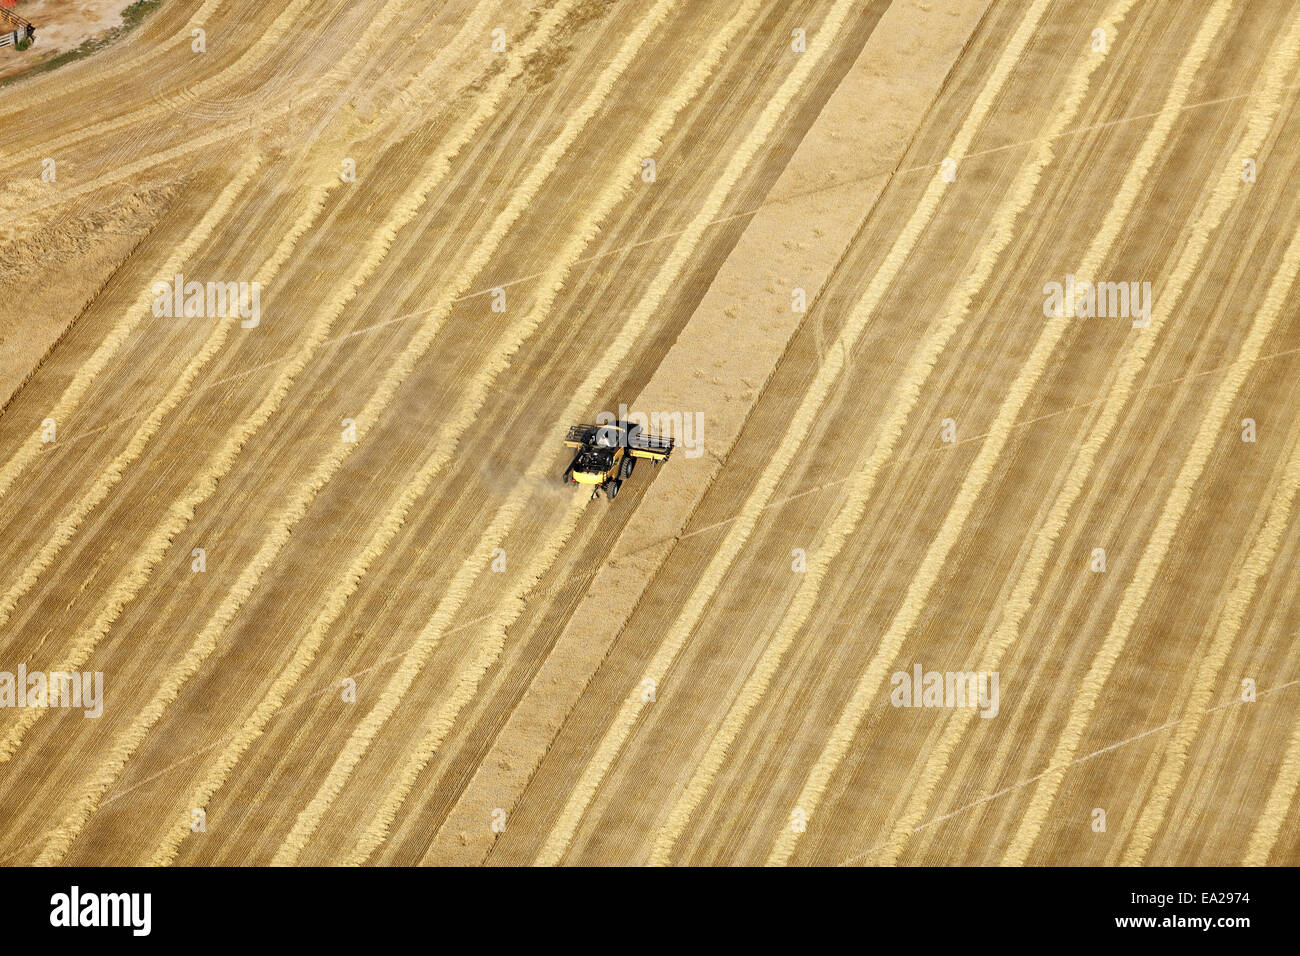 An aerial view of combines in the field harvesting wheat Stock Photo